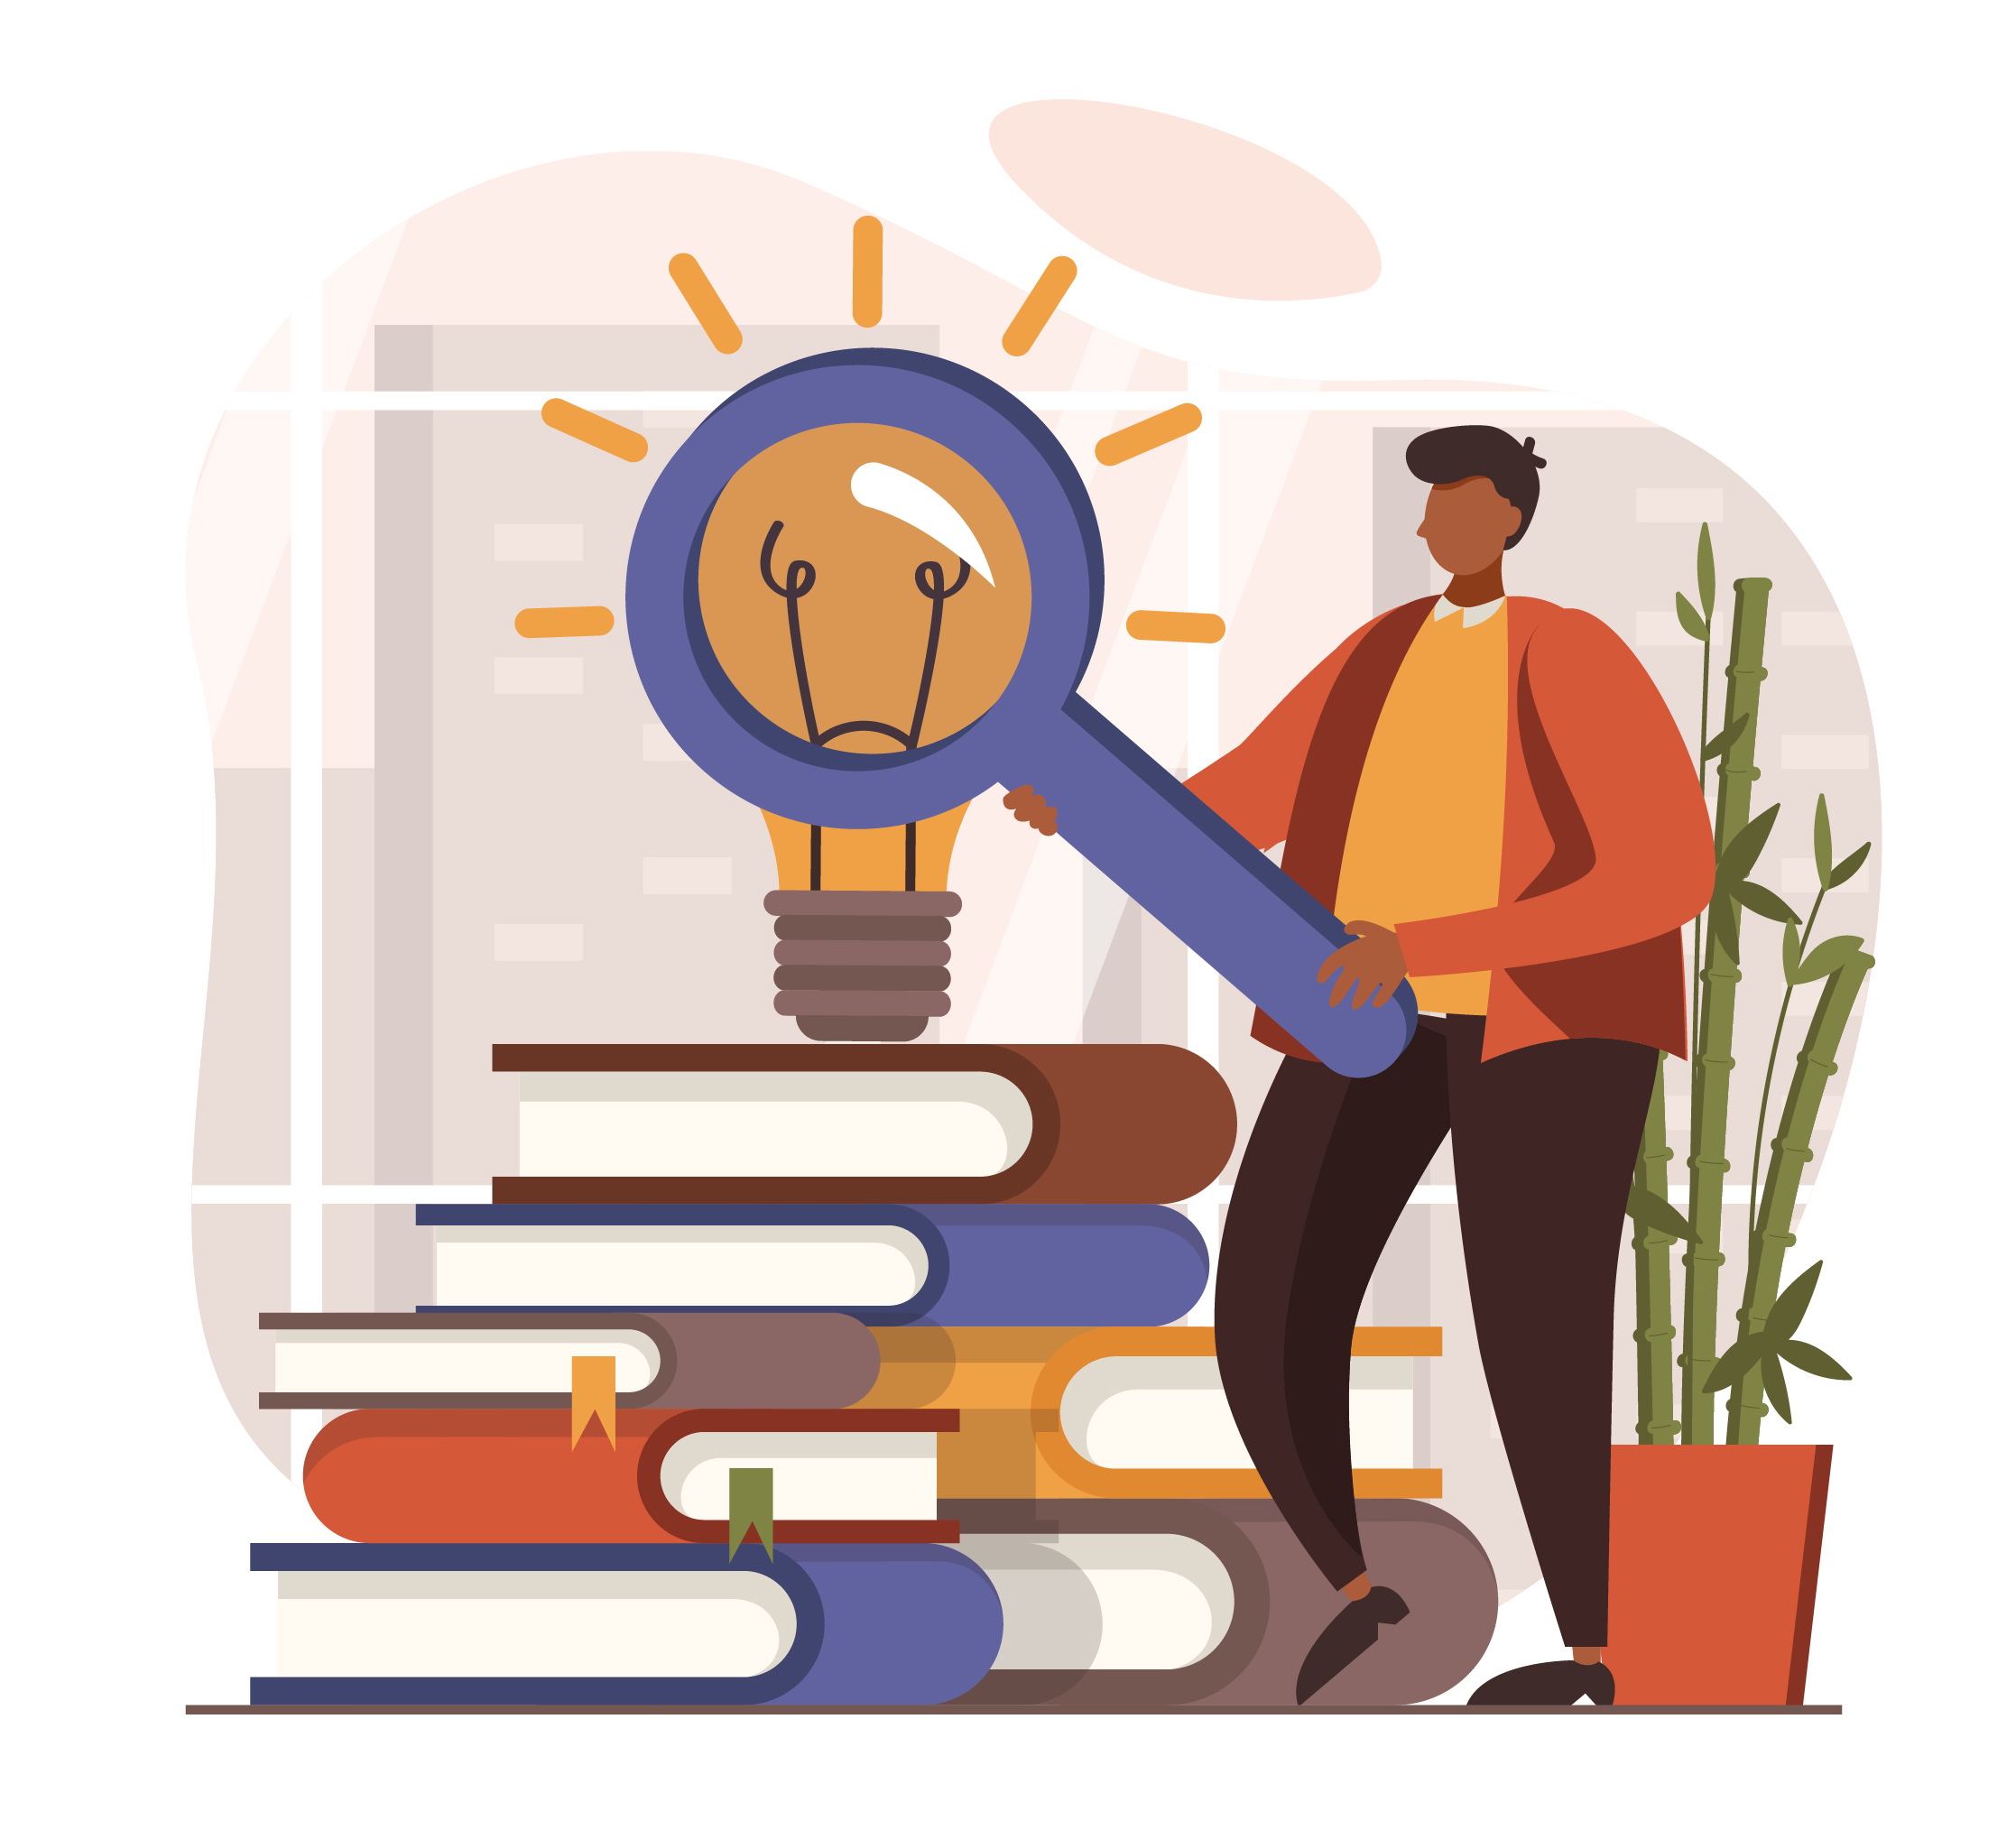 Finding ideas concept isolated person situations. Collection of scenes with people come up with new ideas, brainstorm, develop project plan and strategy. Mega set. Vector illustration in flat design